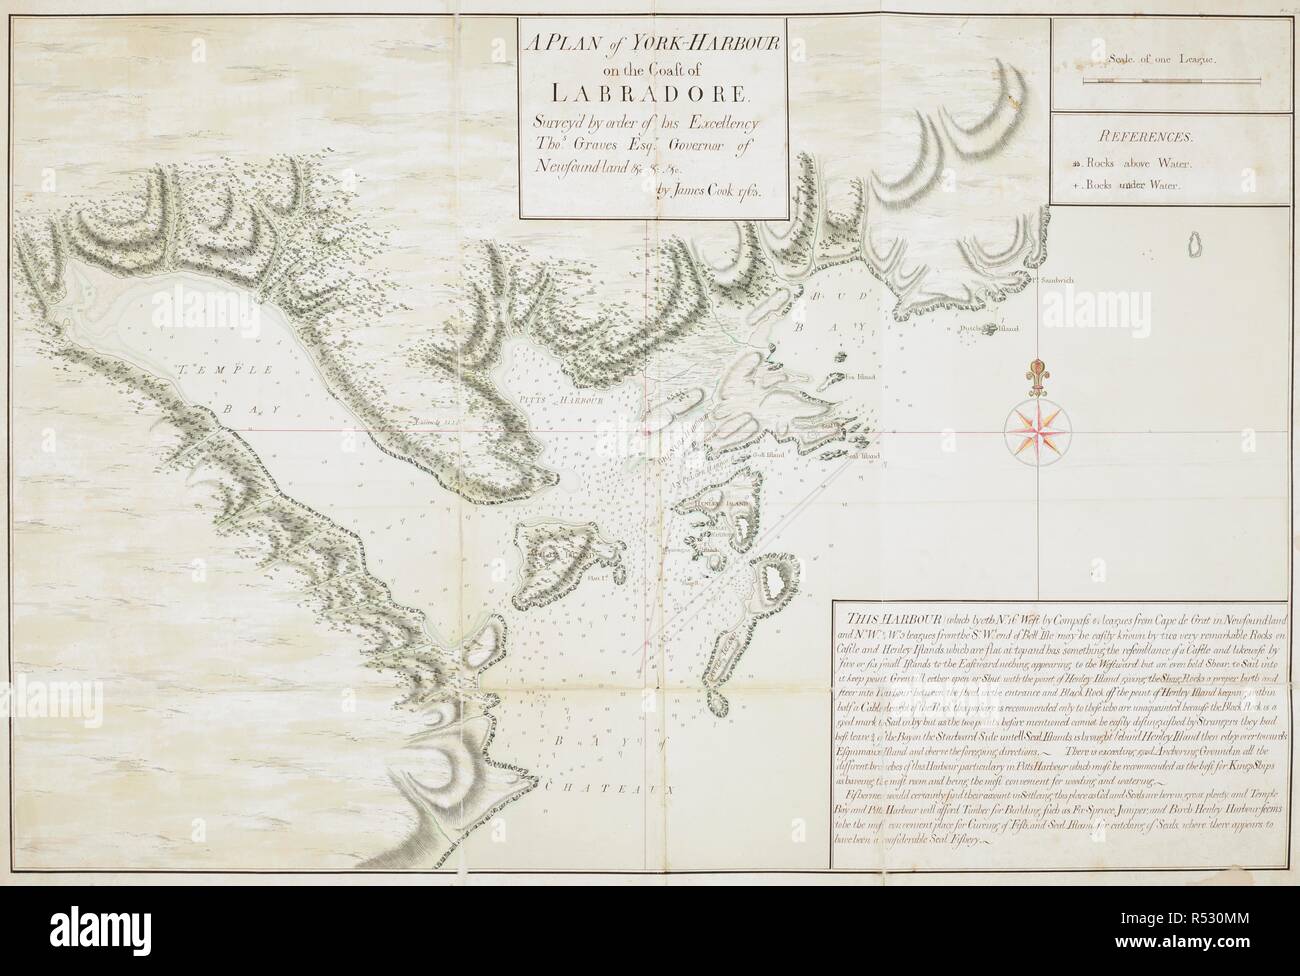 A plan of York harbour (also known as Chateaux Bay) on the coast of Labradore. Commissioned by Thomas Graves, Governor of Newfoundland from 1761 to 1764 , and completed by James Cook in 1763. Sixty-Seven Charts and maps illustrating the voyages and surveys of Capt. James Cook, R.N., and other discoverers. circa 1760-1780. Source: Add. 31360, No.24. Stock Photo